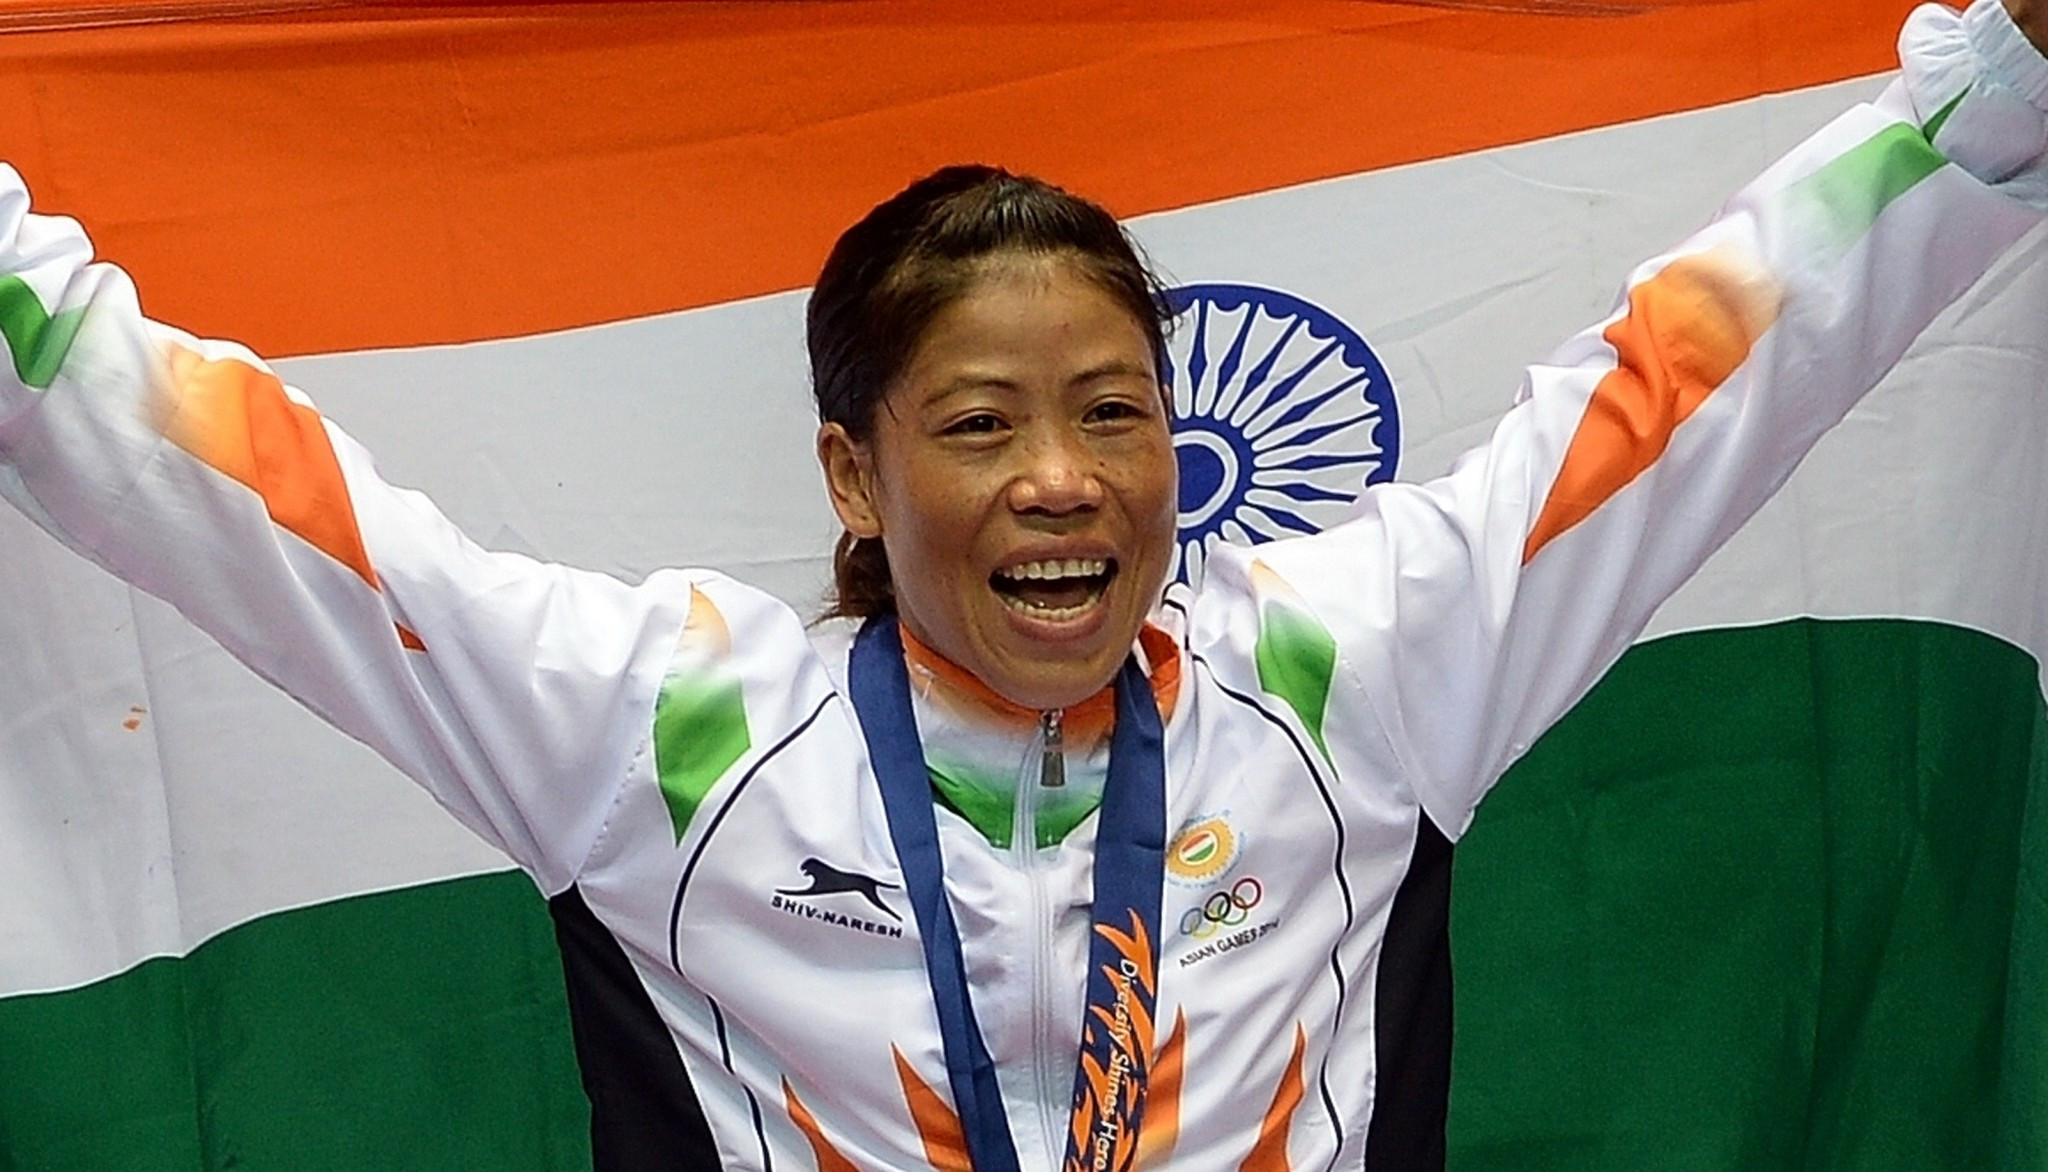 Olympic medallist Mary Kom has expressed her shock following the resignation of India's first foreign coach for female boxers within a month of taking up the role ©Getty Images